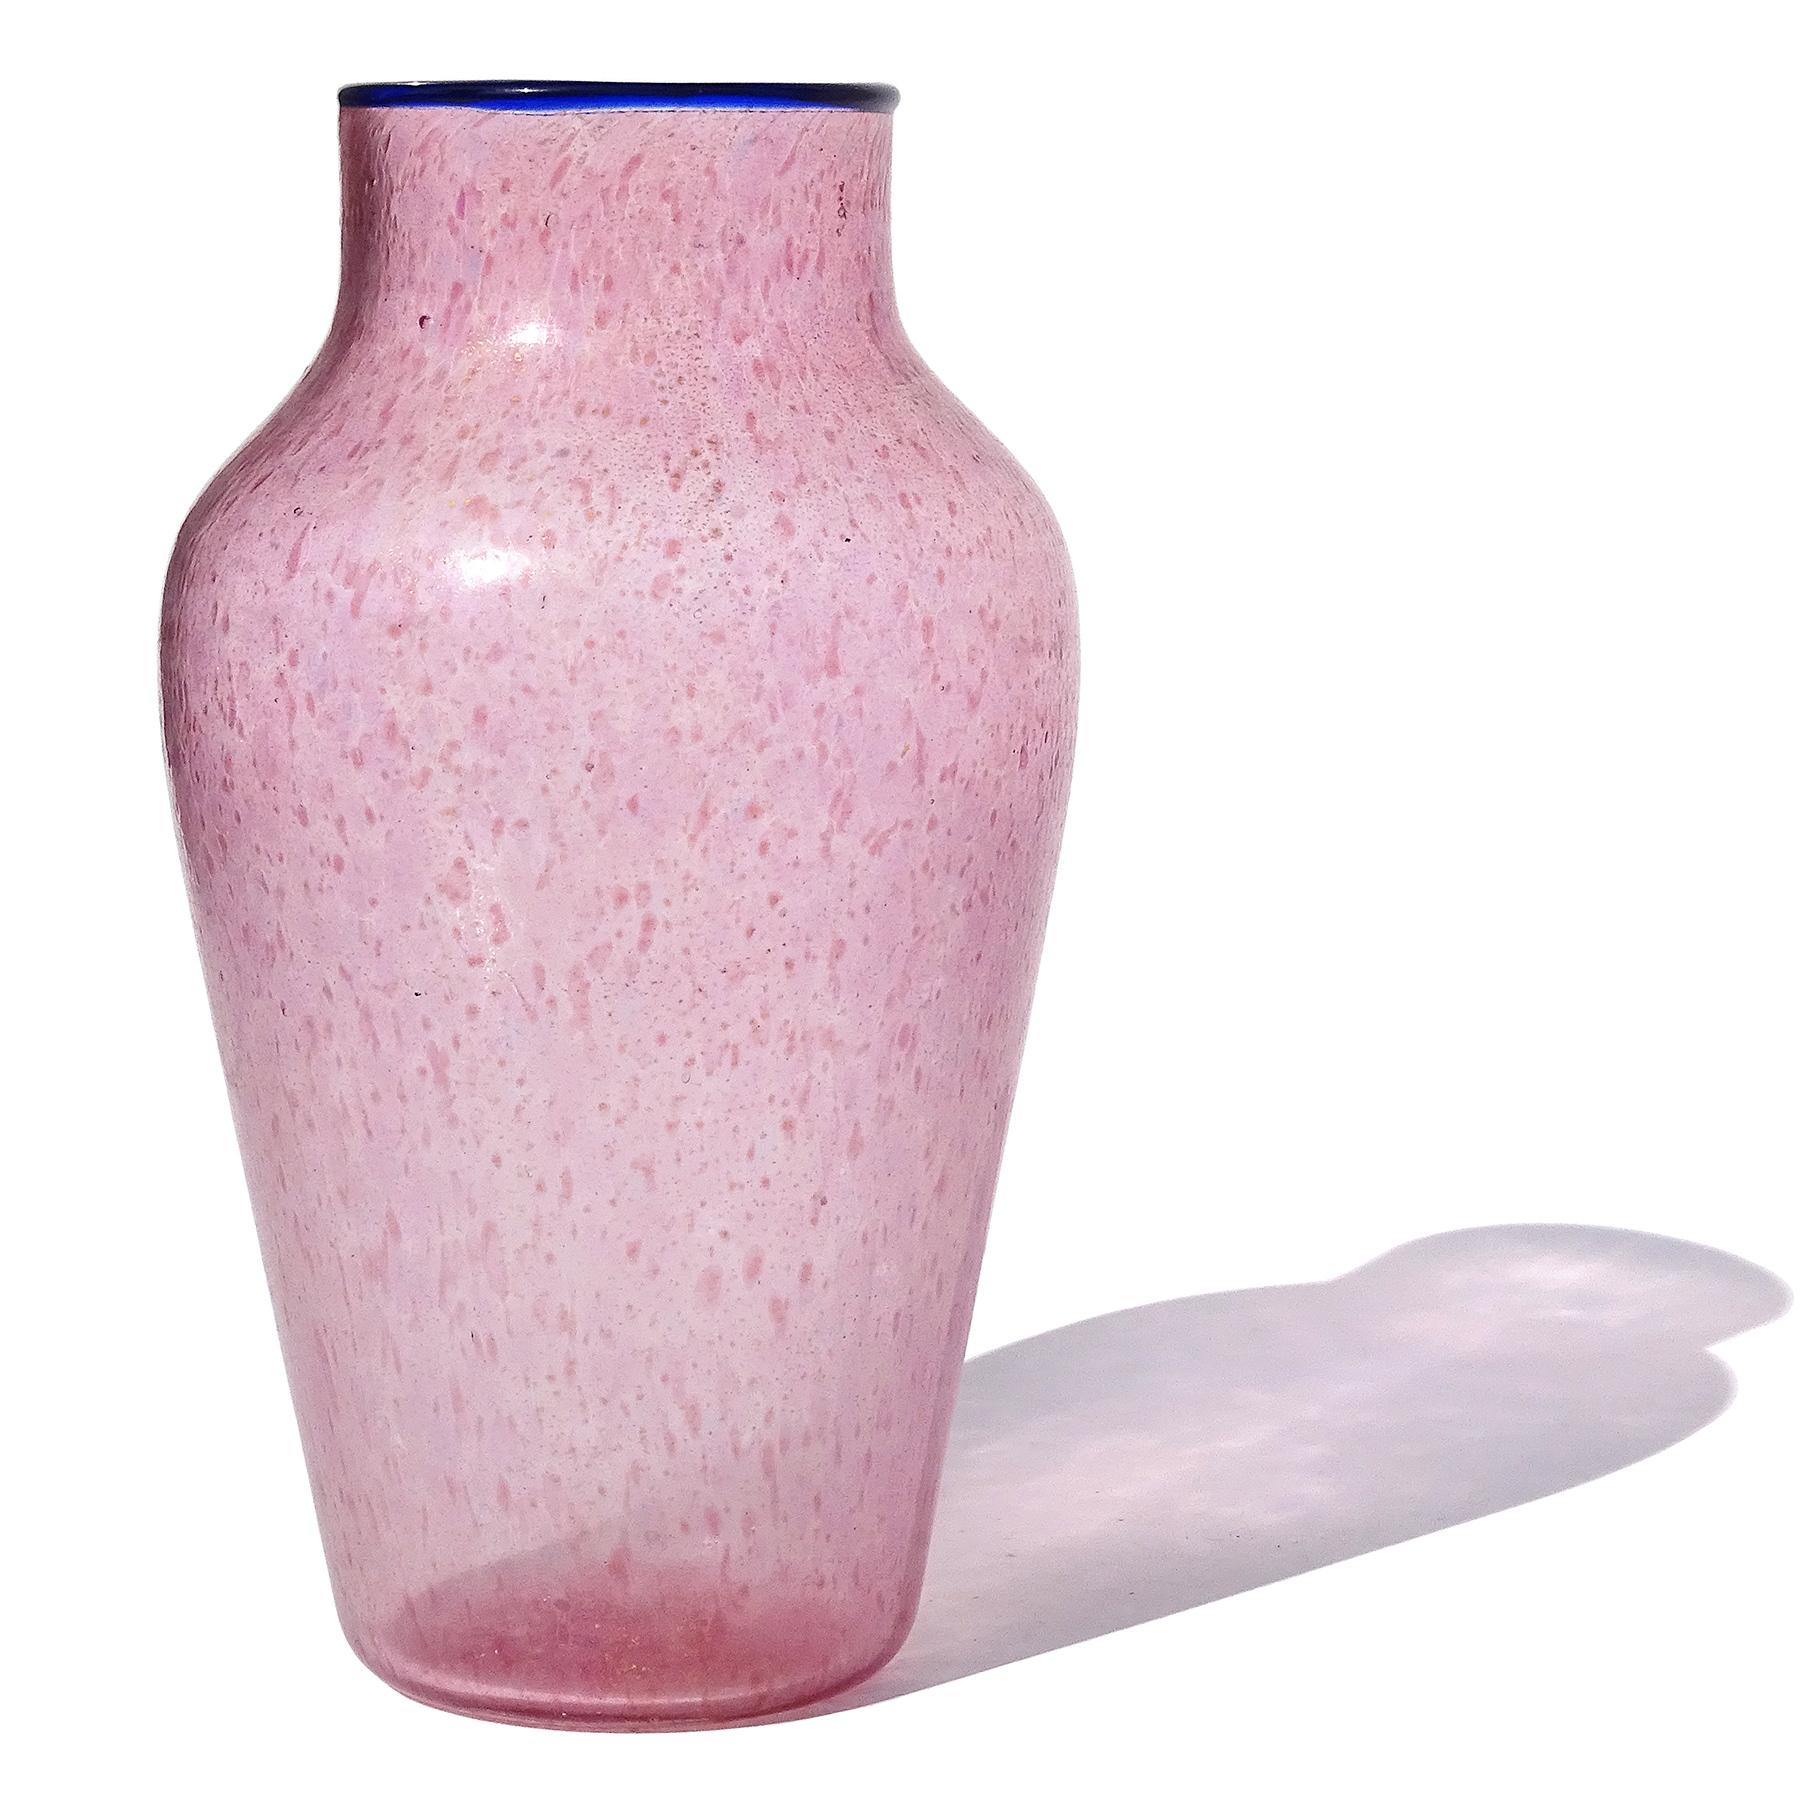 Beautiful, antique, early Venetian / Murano hand blown pink, blue and gold flecks Italian art glass flower vase. Created in the manner of the Salviati and Fratelli Toso companies. The piece has a ton of little pink, and some blue dots that create